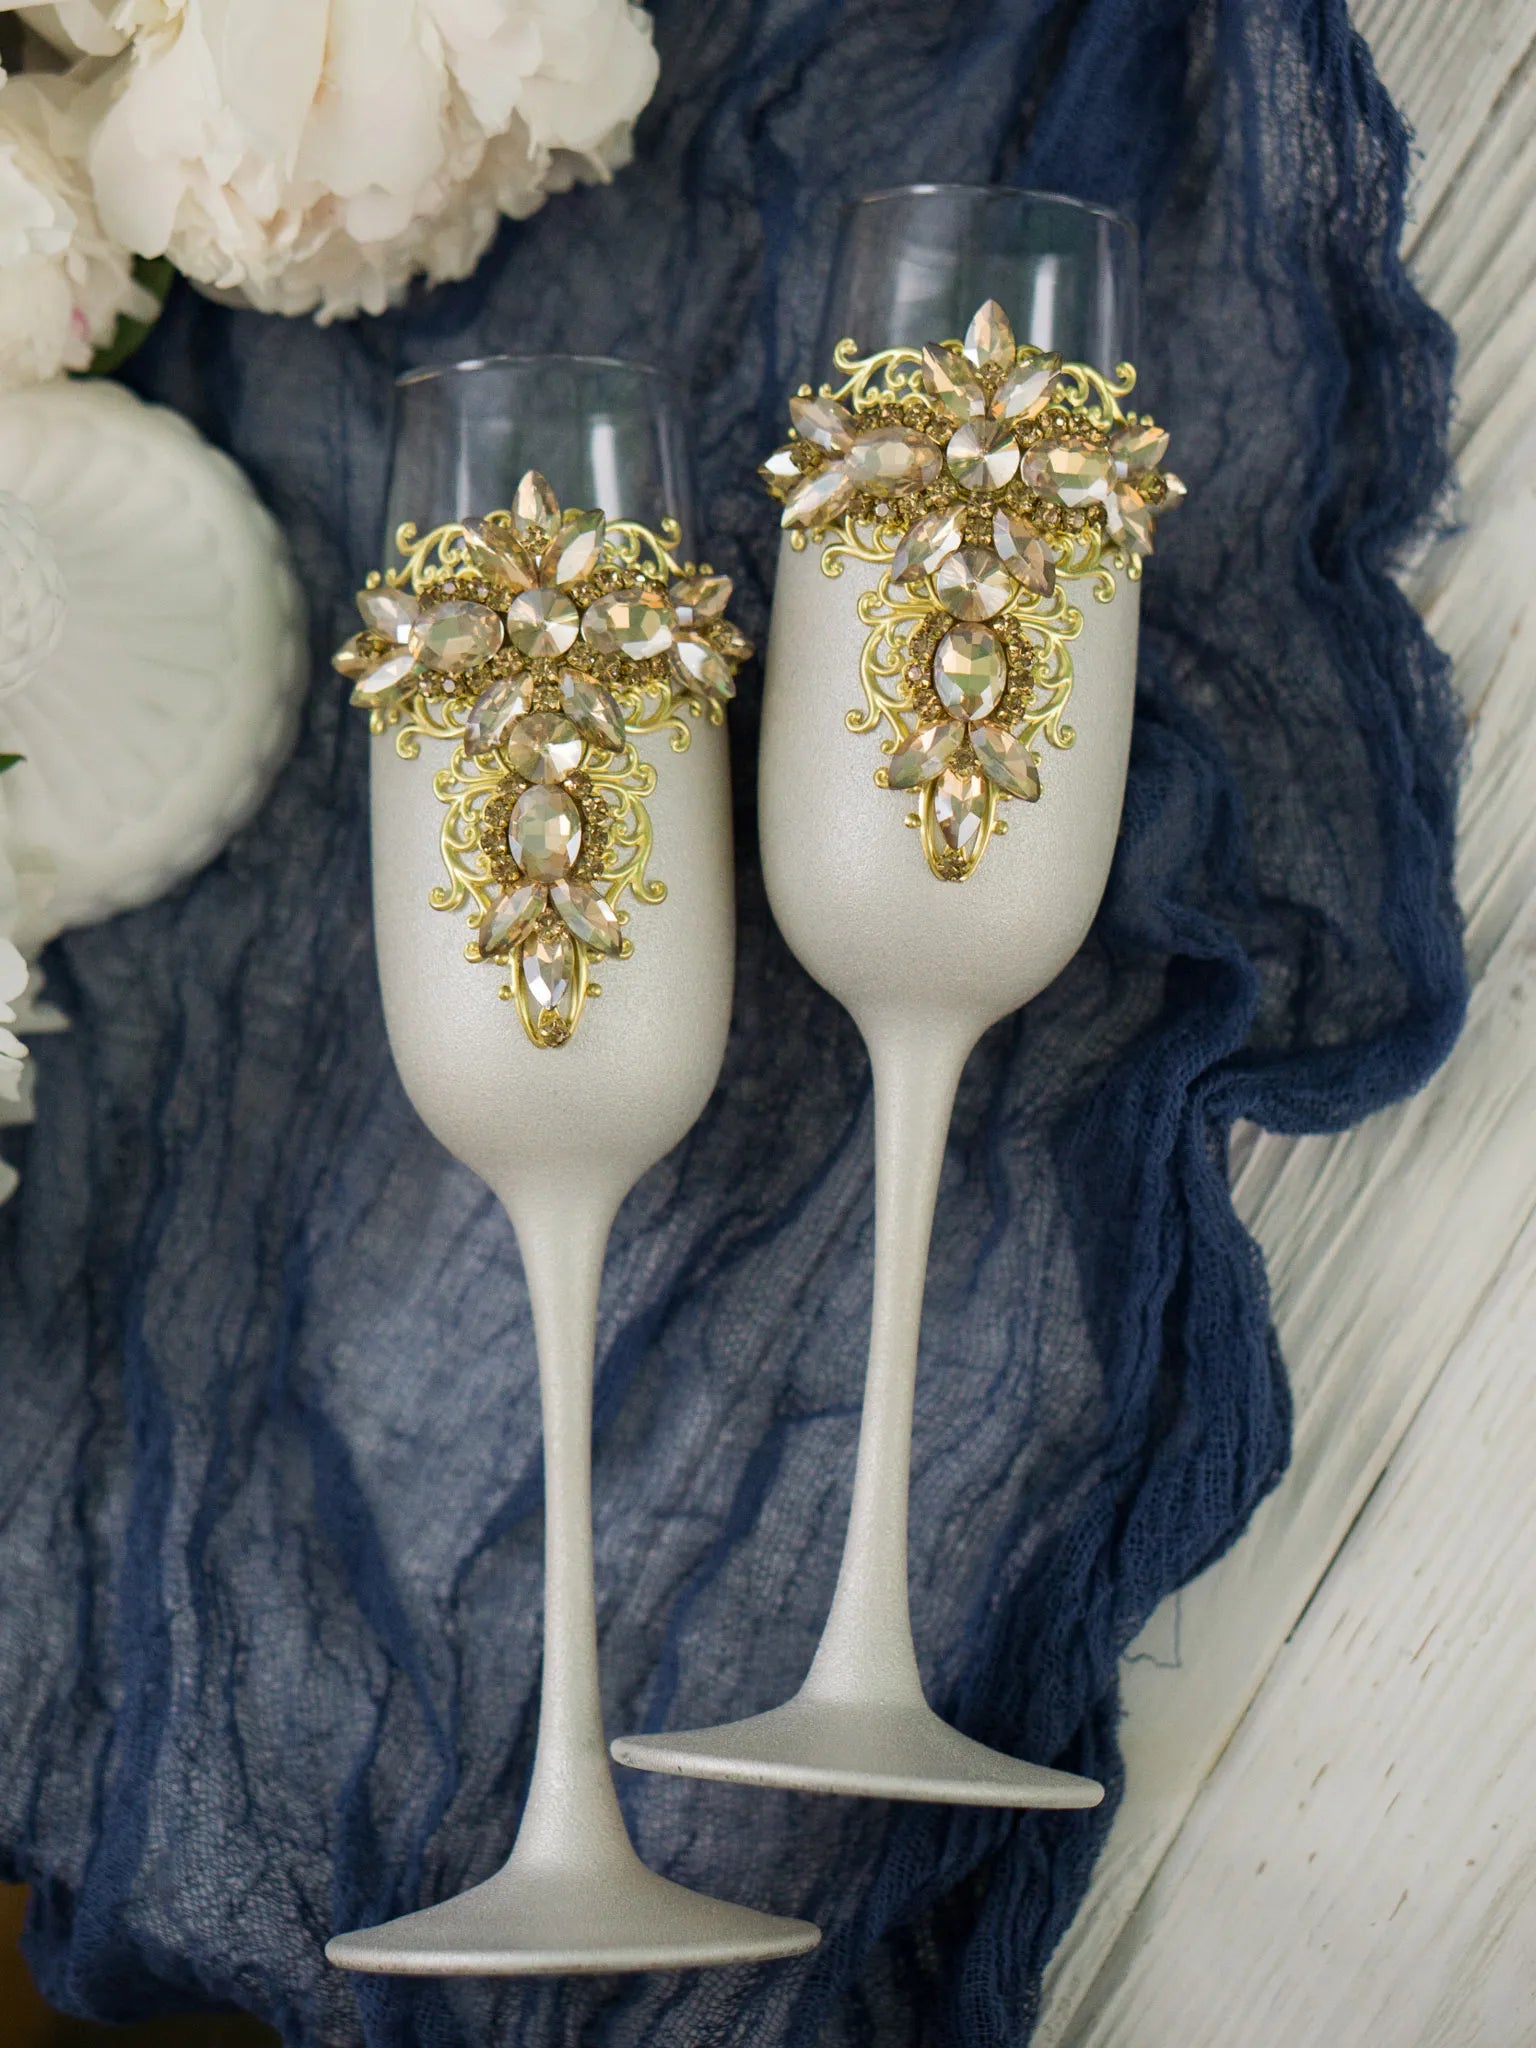 Special occasion champagne glasses with intricate gold decor